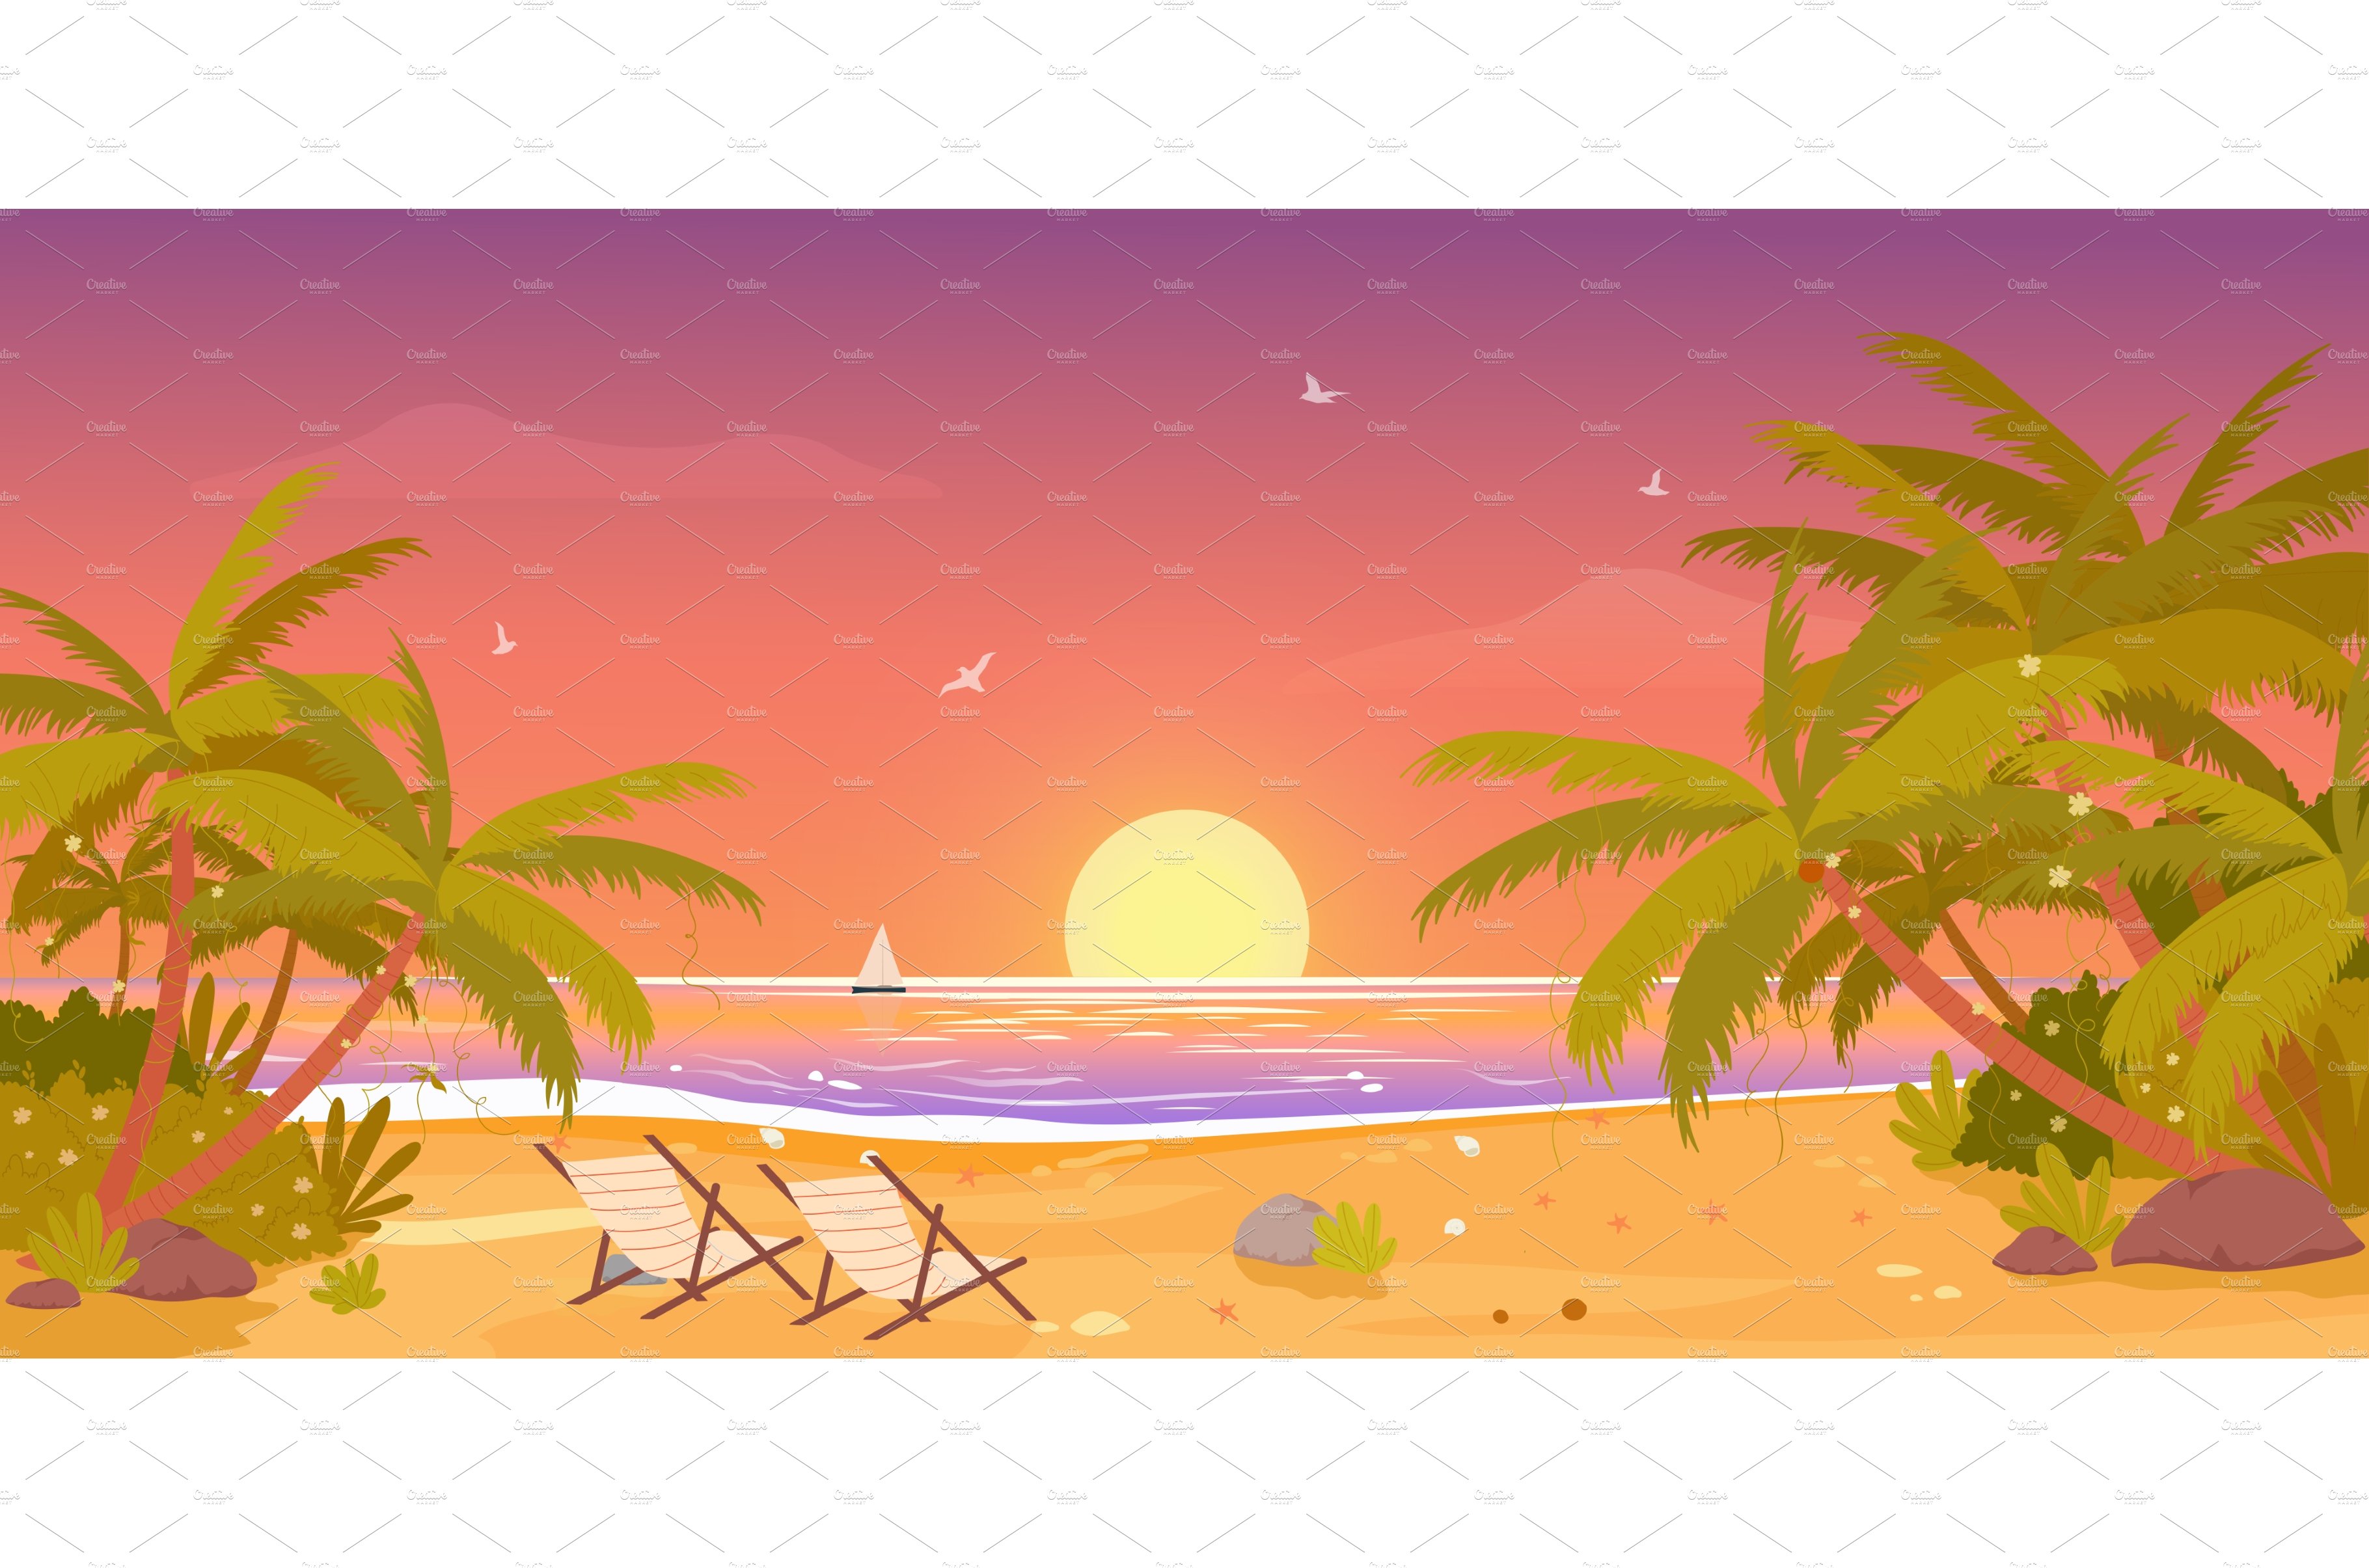 Sunset on tropical beach landscape cover image.